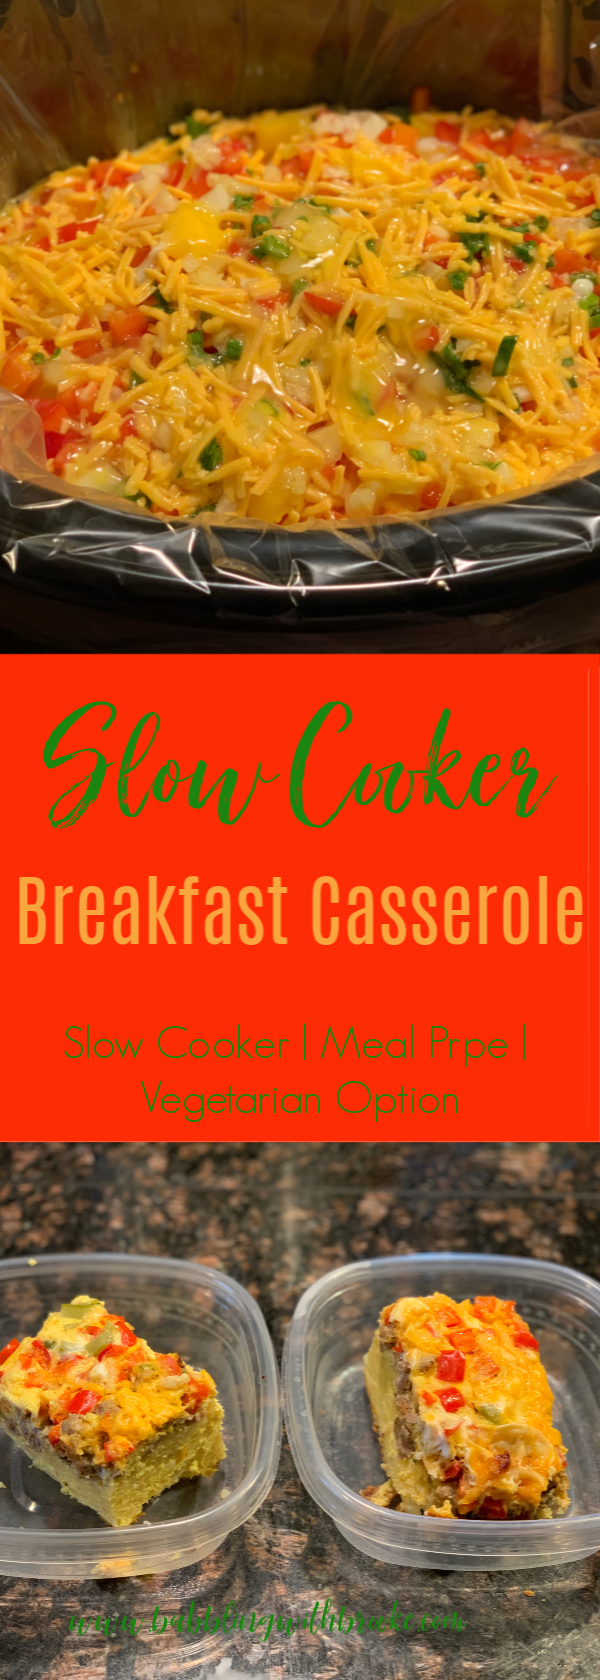 This delicious slow cooker breakfast casserole is so easy to make and perfect for meal prepping! It can be prepped in minutes and made in the slow cooker for a week worths of breakfast! This is also a great breakfast casserole is the perfect recipe for a brunch or a family gathering. #mealprep #mealprepbreakfast #slowcookerbreakfast #breakfastcasserole #mealprepcasserole #vegeterianbreakfastcasserole #slowcooker